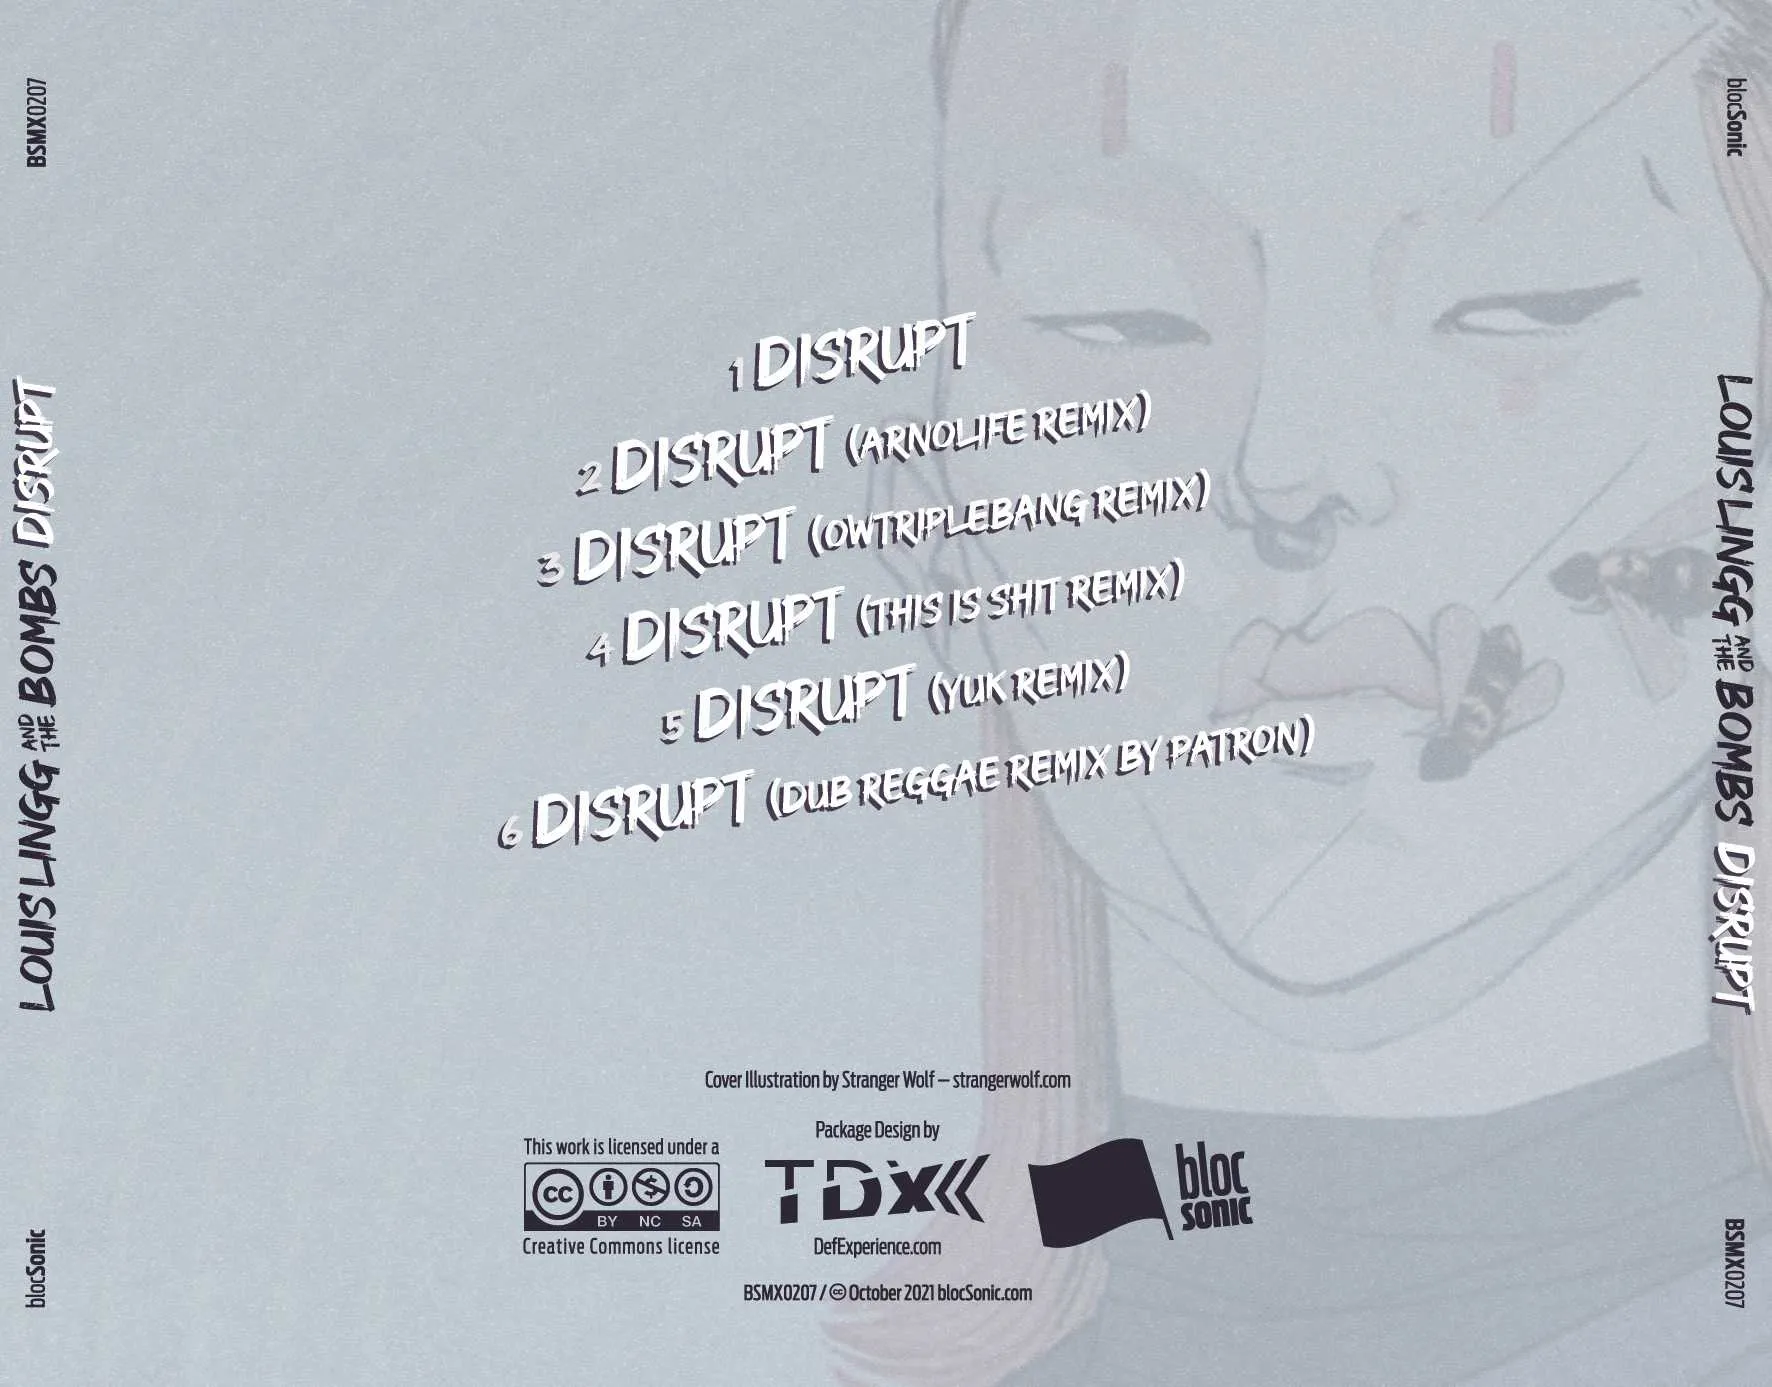 Album traycard for “Disrupt” by Louis Lingg and The Bombs